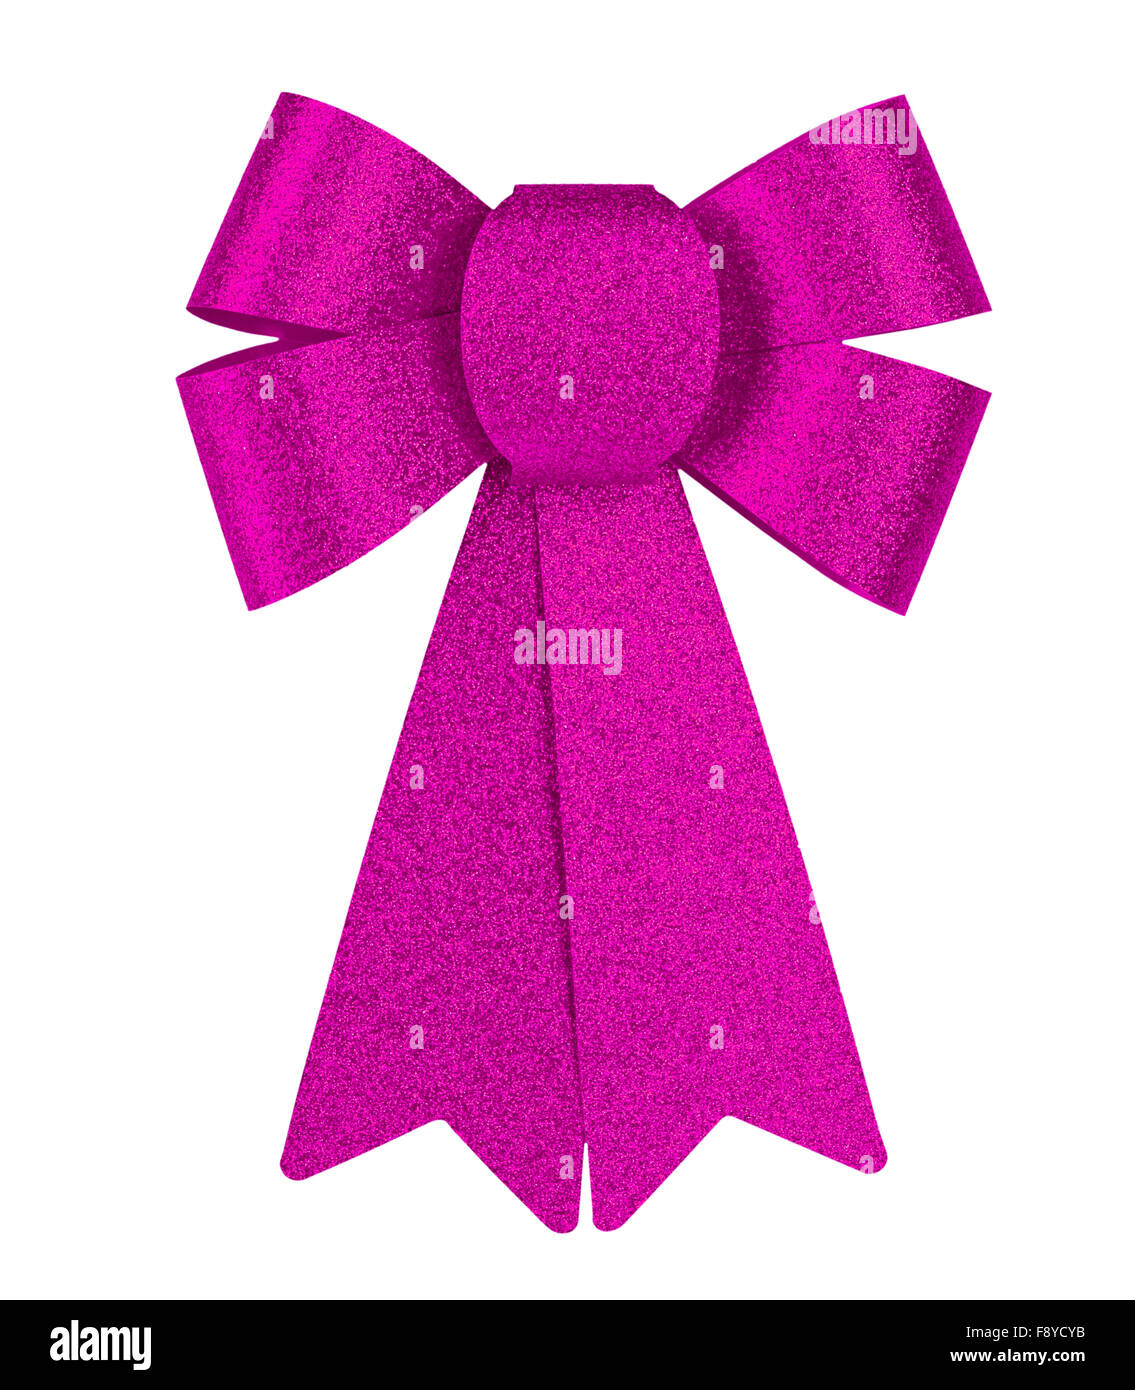 Pink brilliant gift bow with glitter close-up isolated on a white background. Stock Photo